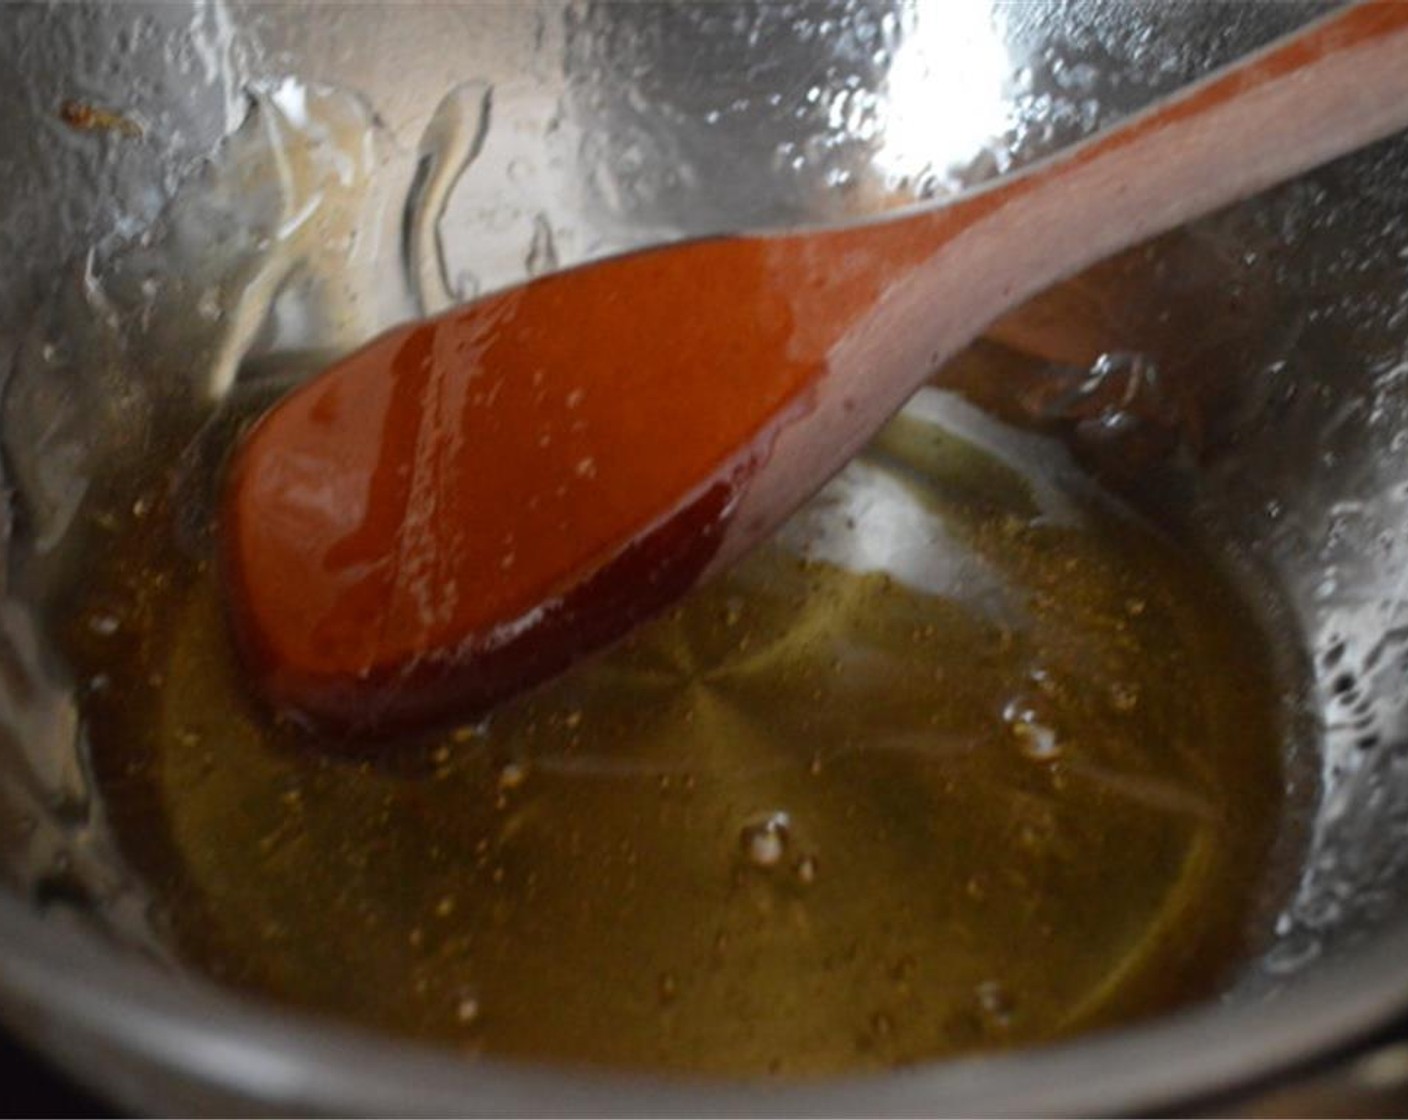 step 9 To make the syrup, combine the Granulated Sugar (1 cup), Water (1 cup) and slices of  Lemon (1) in a sauce pan and heat it up over medium high heat. Let it boil for 15 minutes, stirring occasionally.